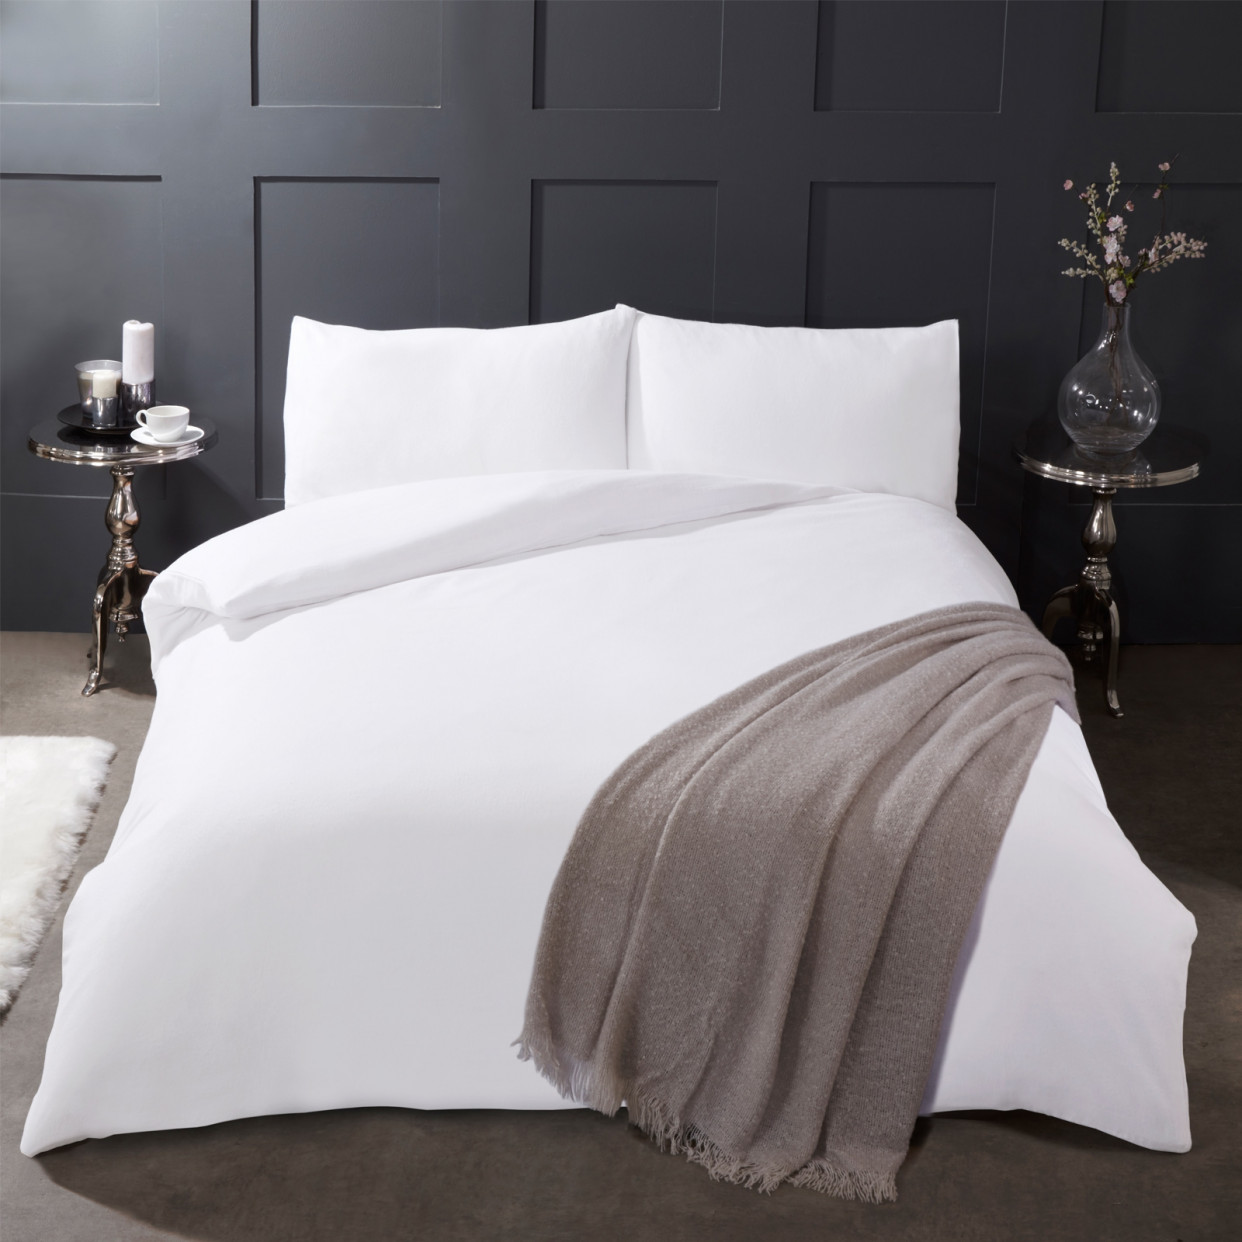 Highams 100% Brushed Cotton Duvet Cover with Pillowcase Plain Flannelette Thermal Bedding Set, Pure White - Double>